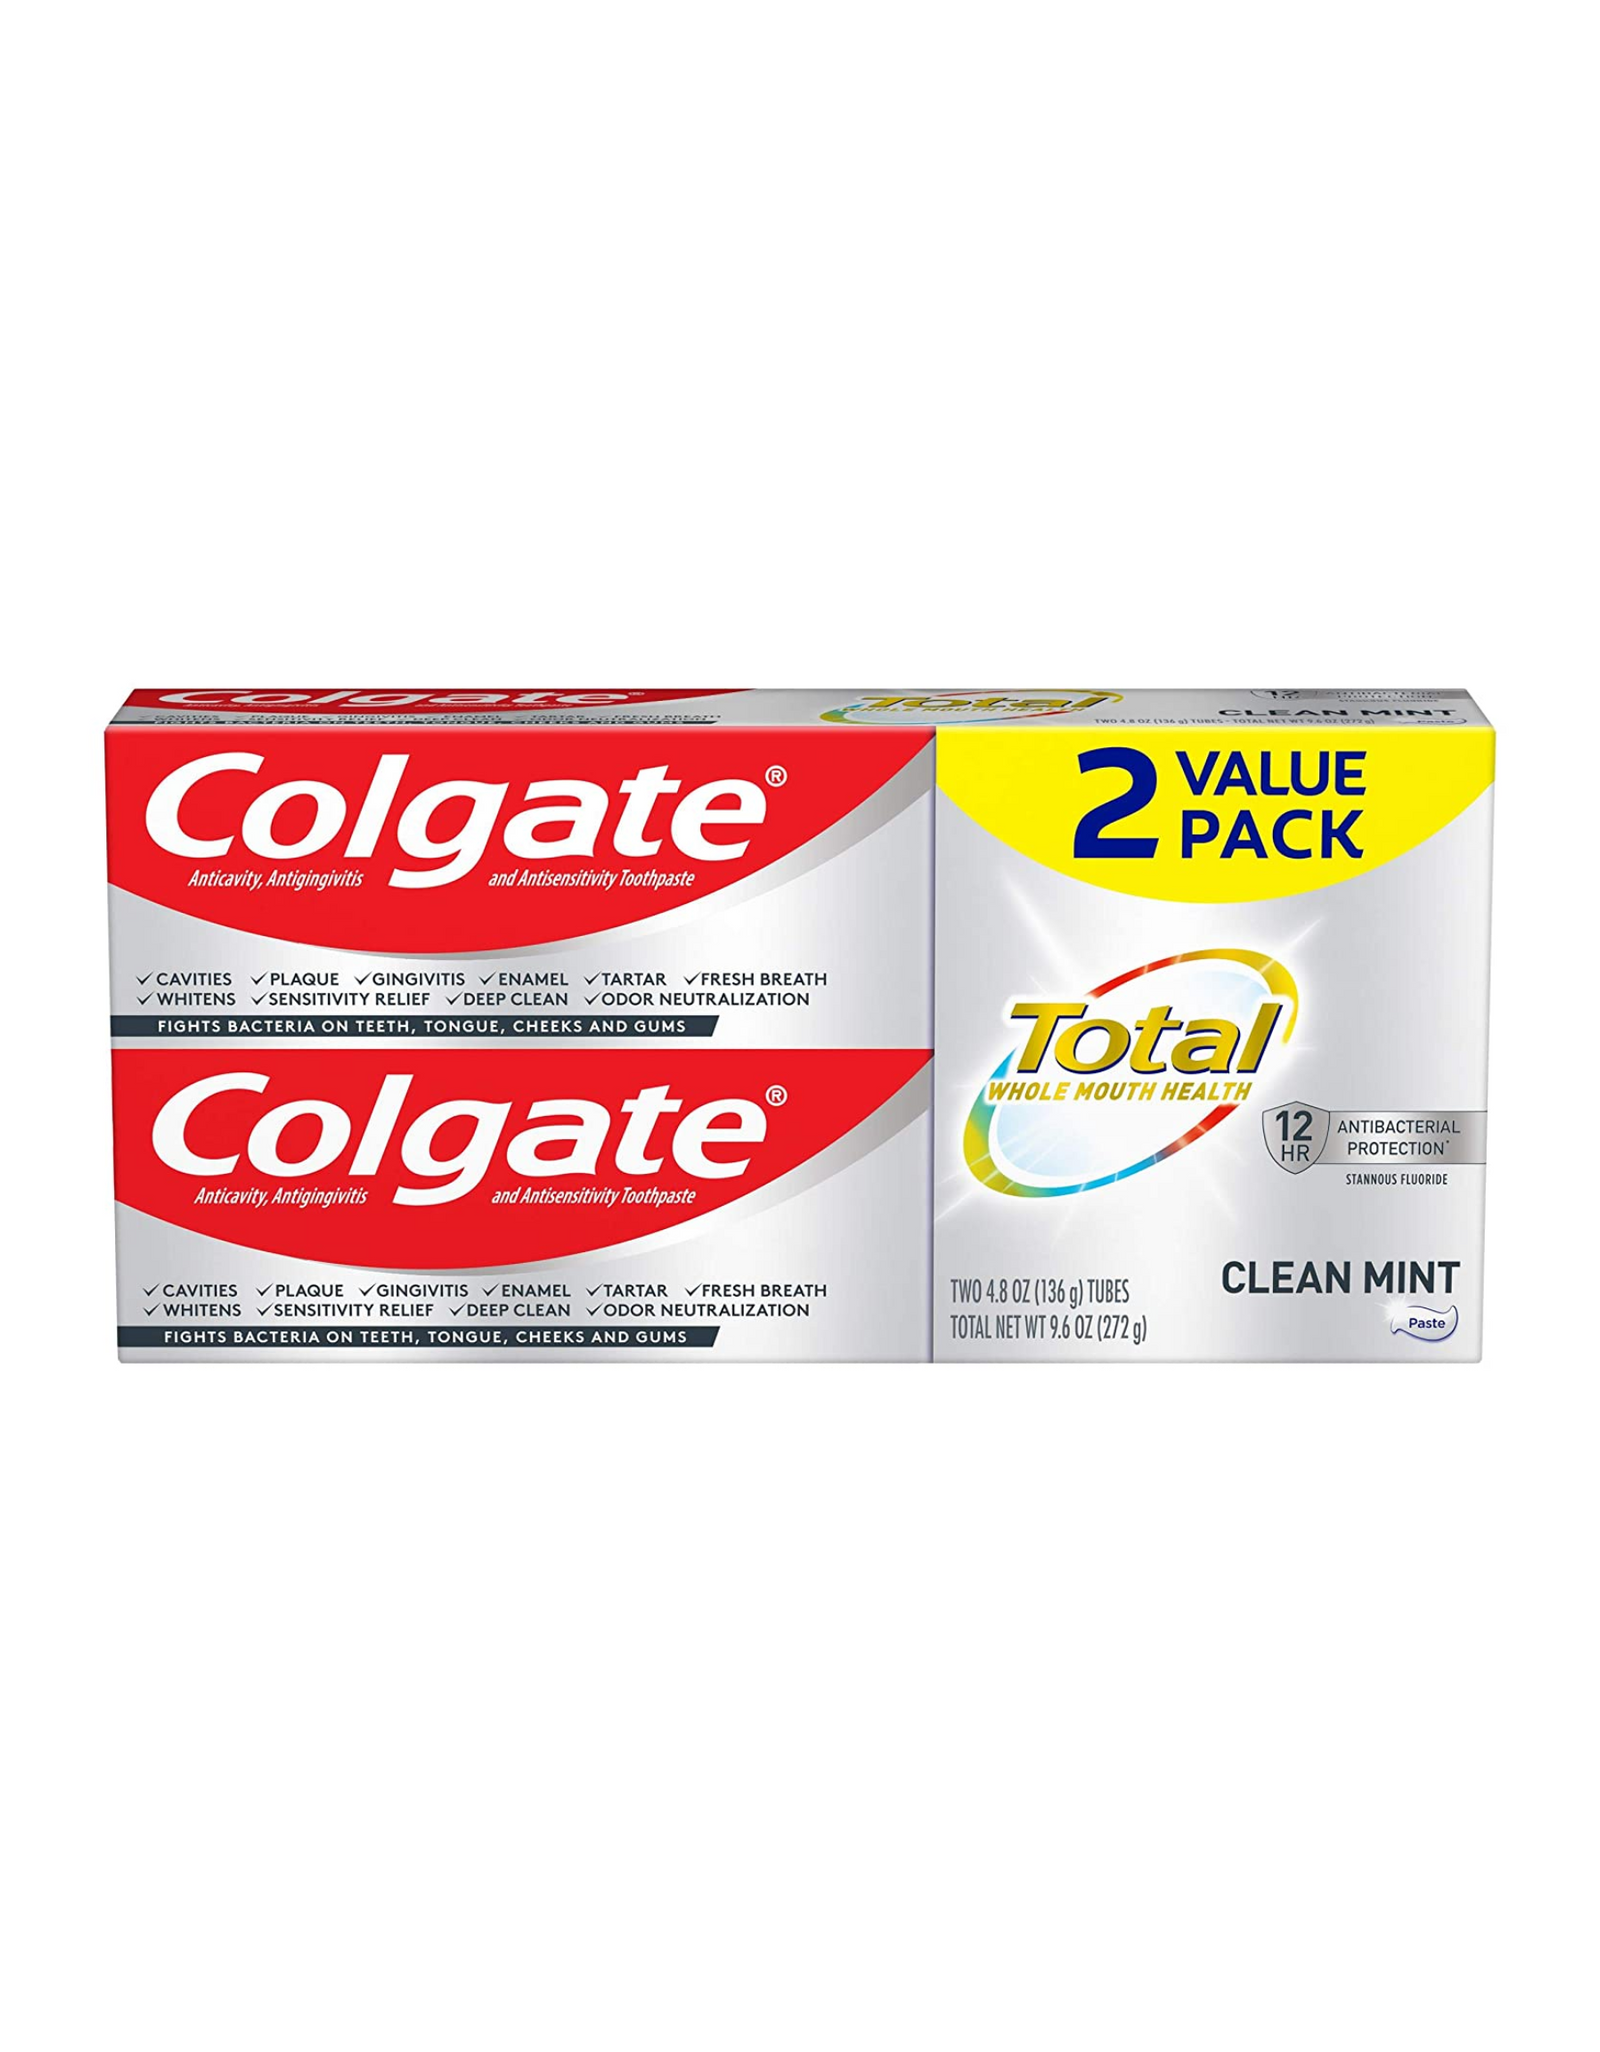 Colgate Total Toothpaste with Whitening, Antibacterial Protection, Clean Mint, 4.8 oz each (Pack of 2)